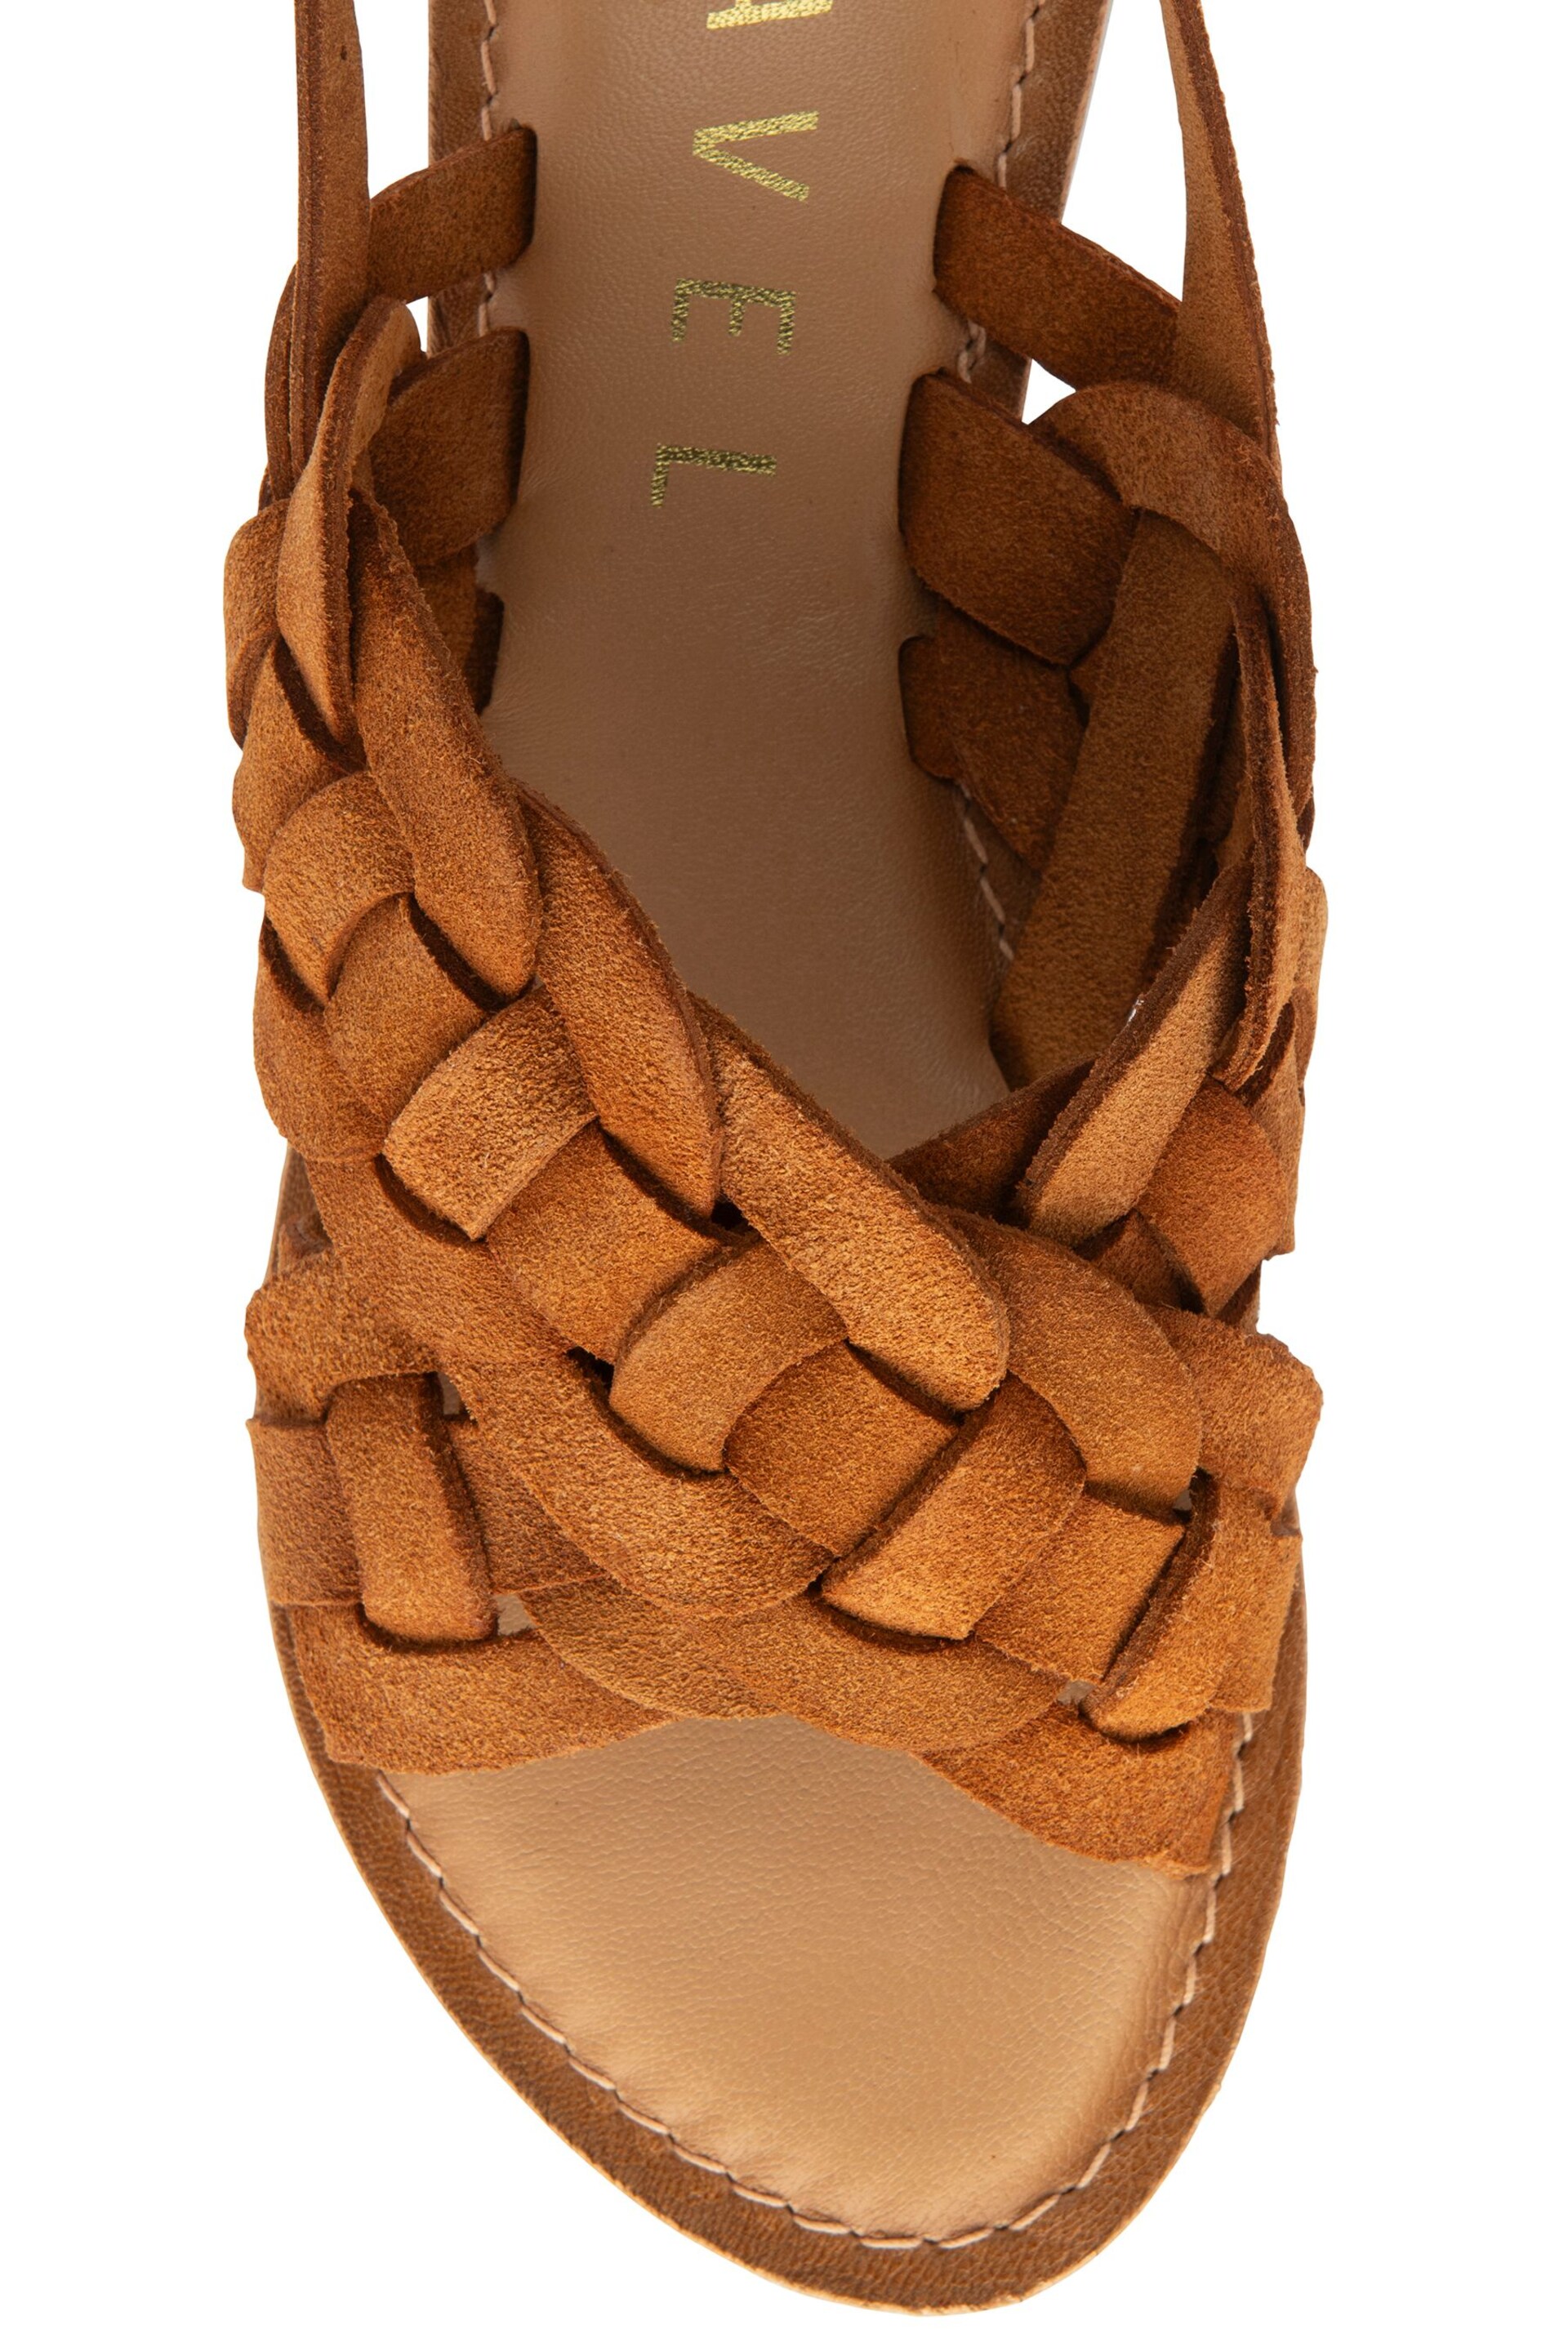 Ravel Brown Leather Woven Upper Flat Sandals - Image 4 of 4